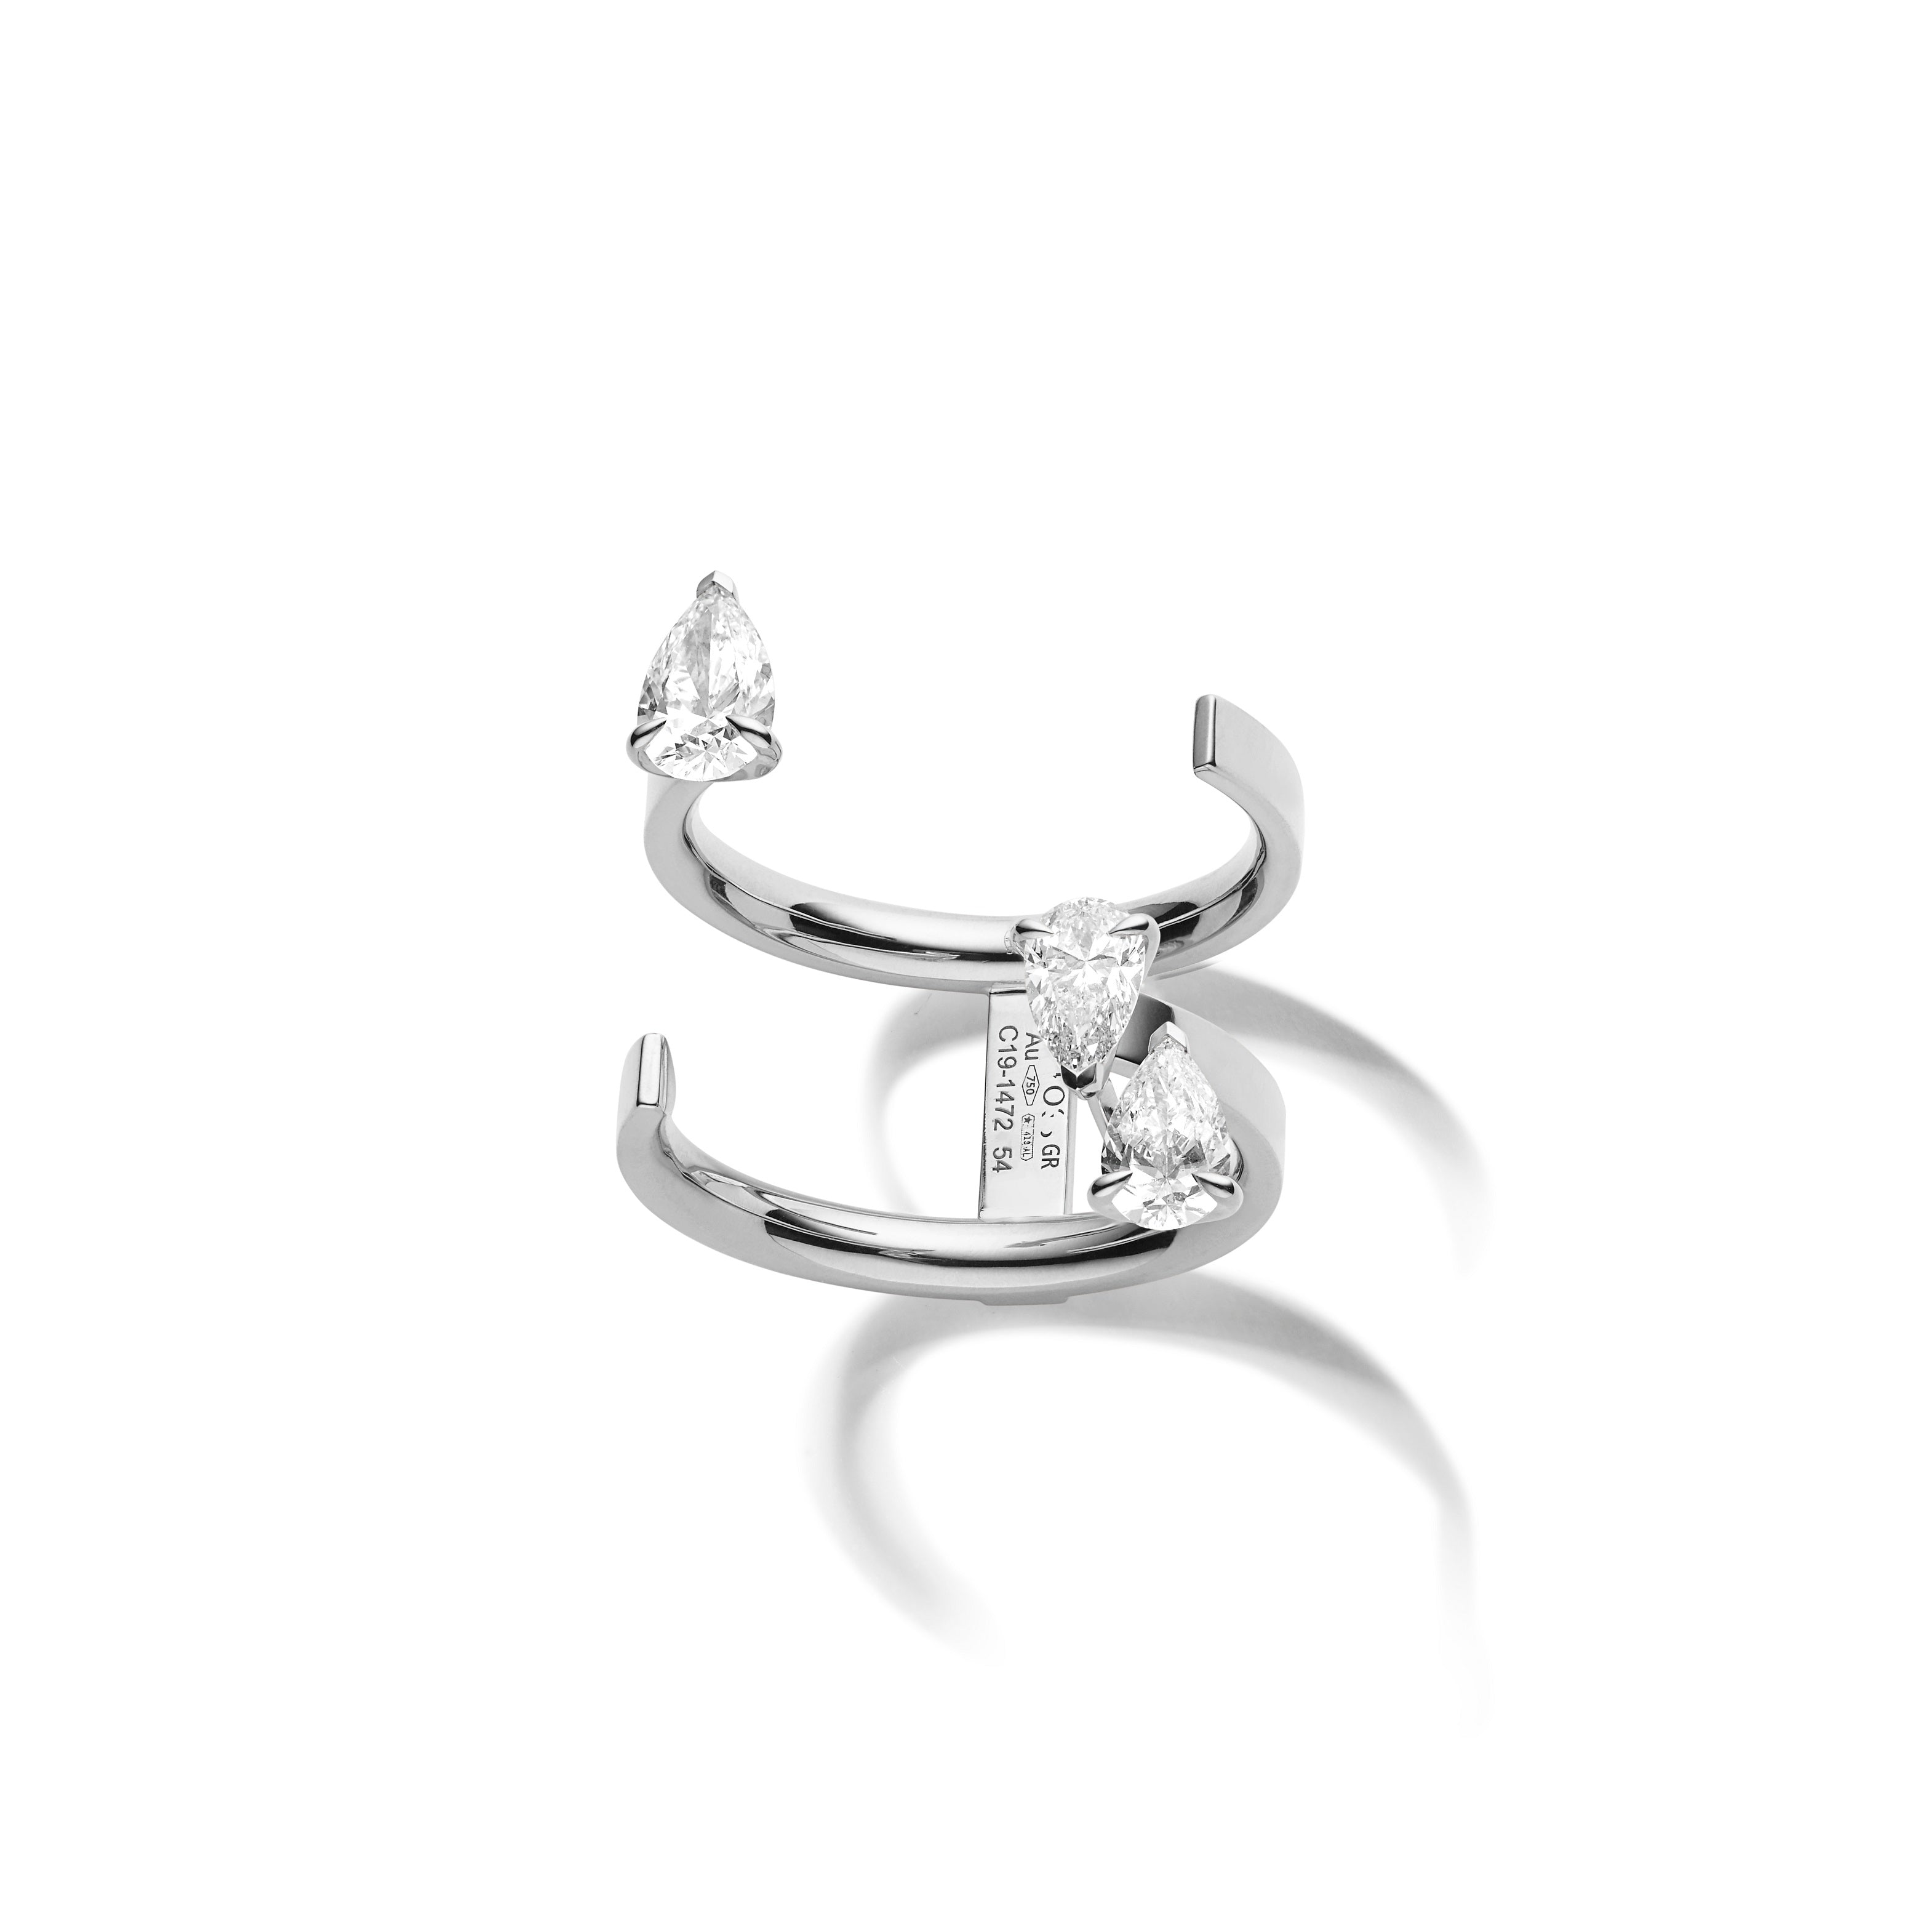 Serti sur Vide ring in white gold with 3 pear cut diamonds